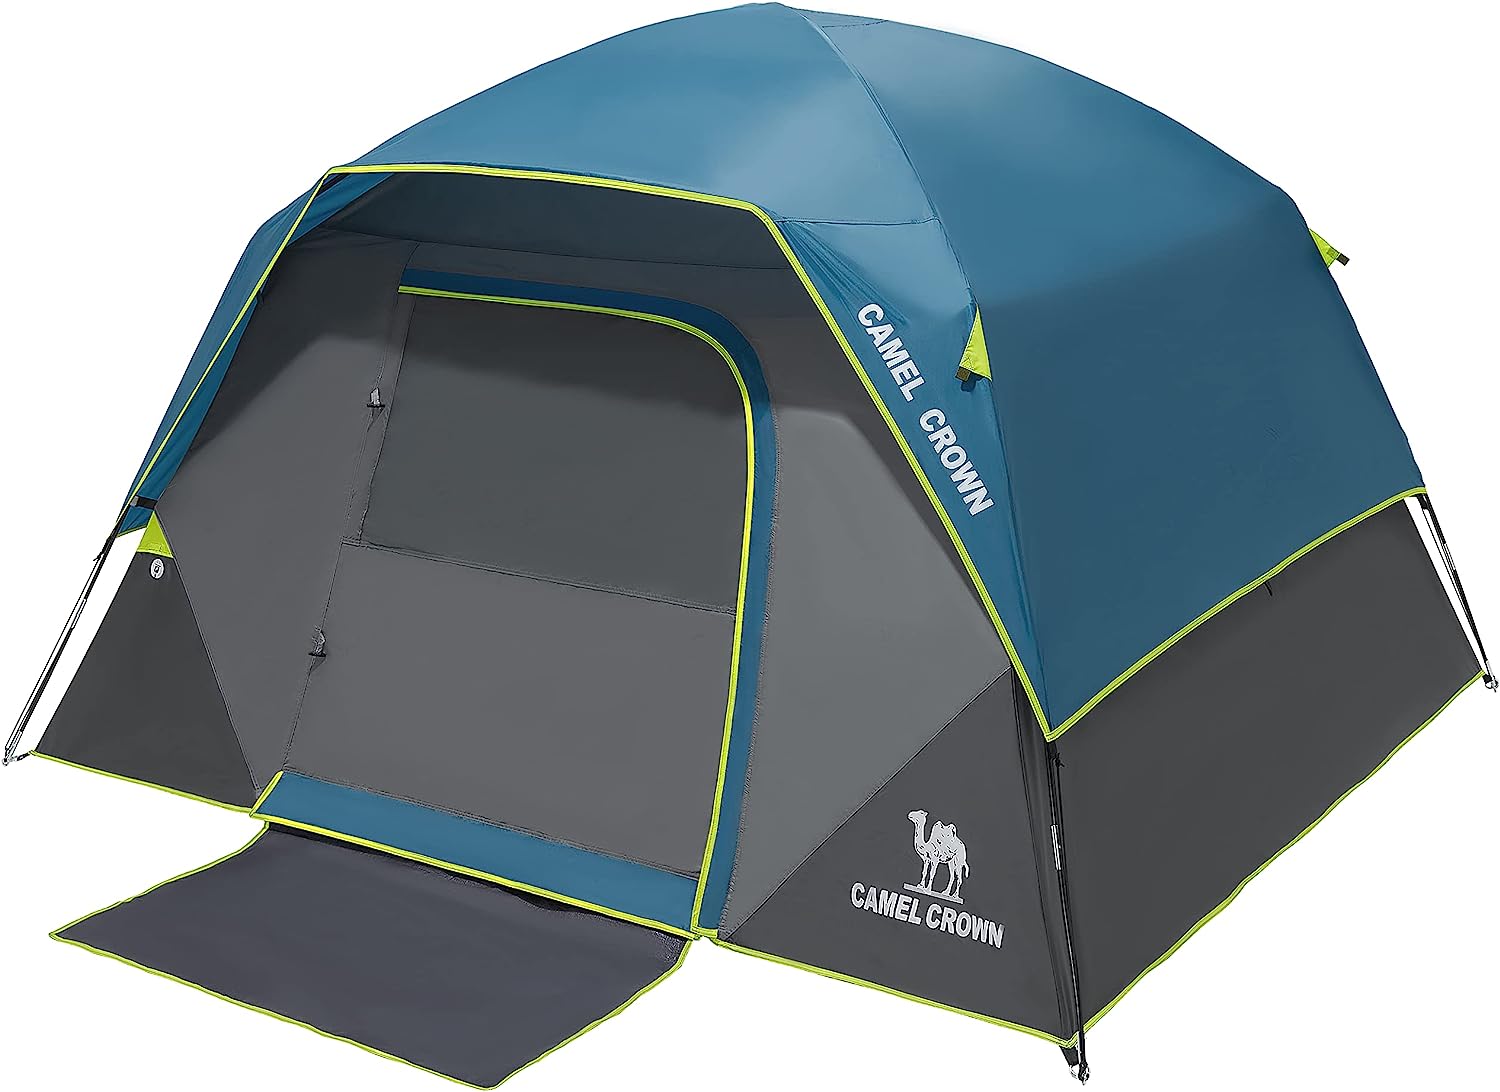 early Prime Day deals: Coleman camping gear is on sale for